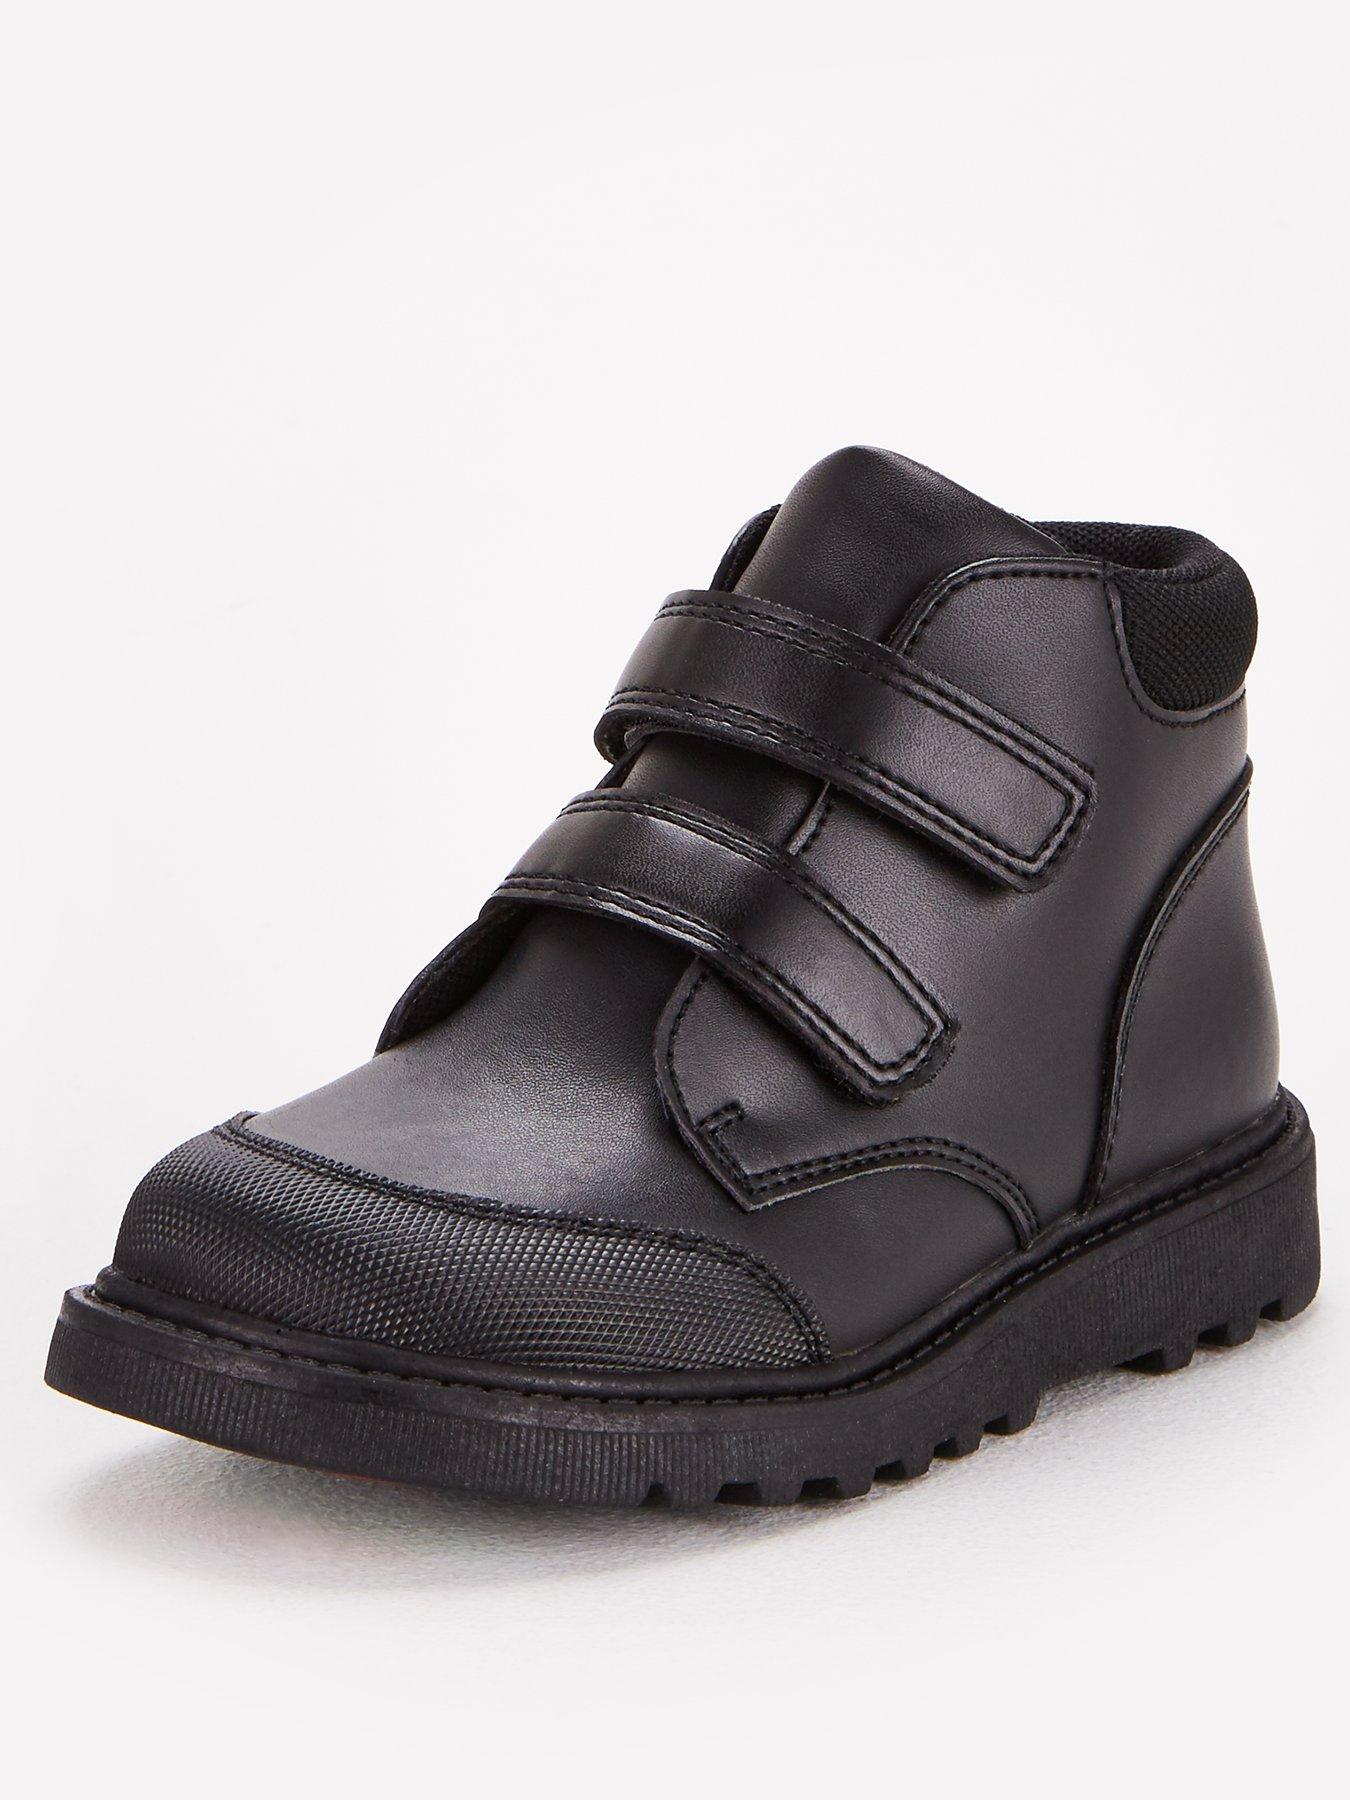 boys leather school boots